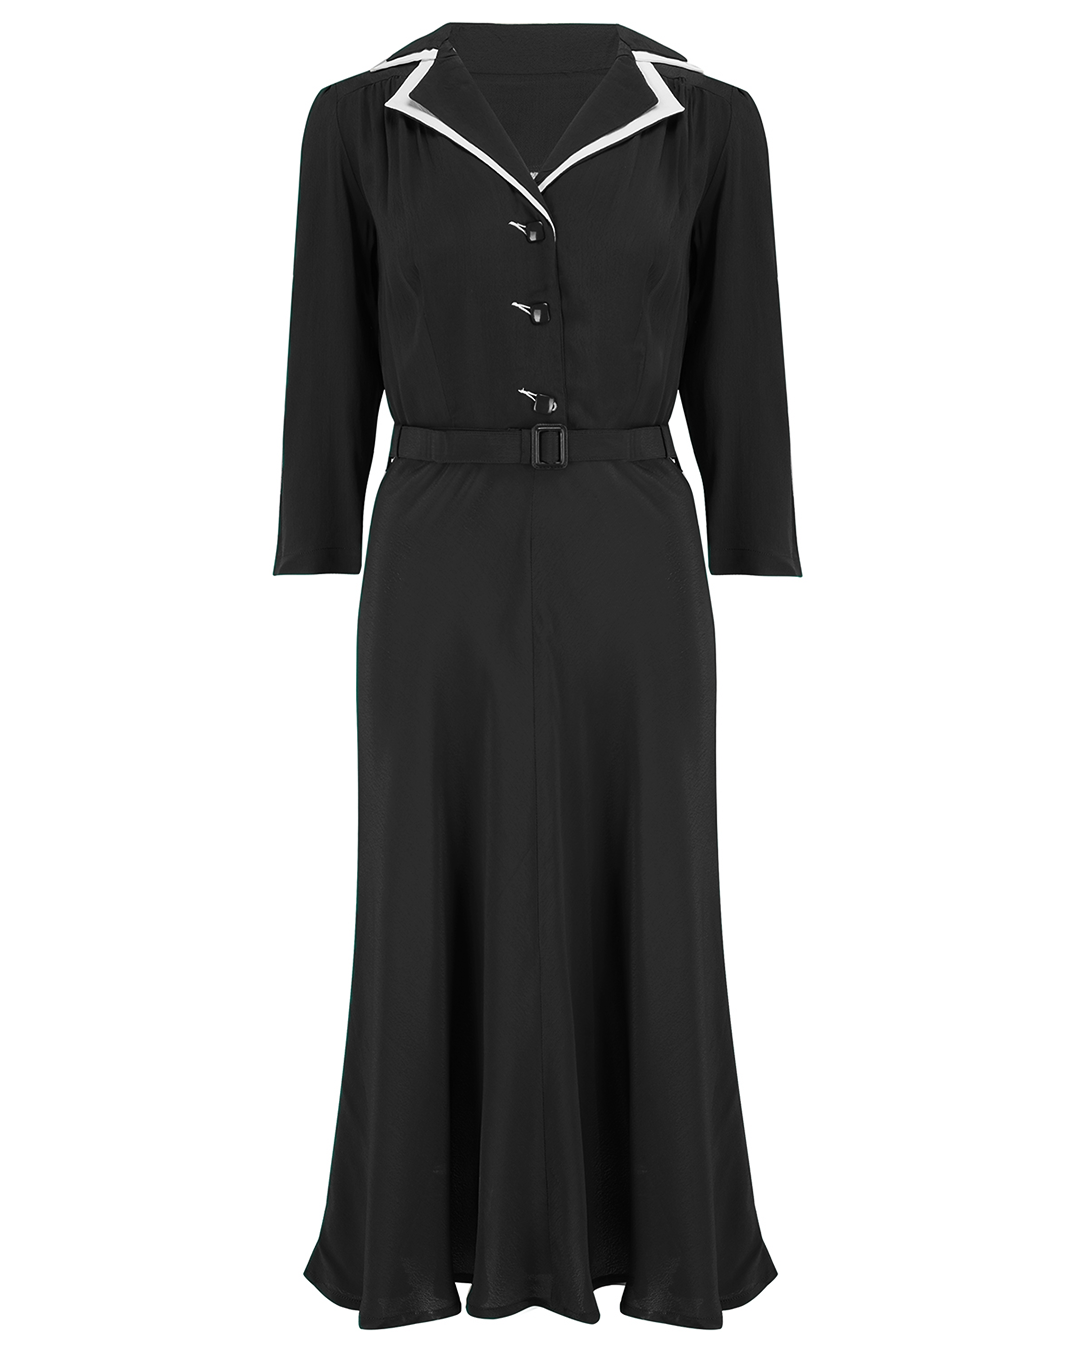 Long sleeve Lisa - Mae Dress in Black with contrast under collar, Authentic 1940s Vintage Style at its Best - CC41, Goodwood Revival, Twinwood Festival, Viva Las Vegas Rockabilly Weekend Rock n Romance The Seamstress Of Bloomsbury